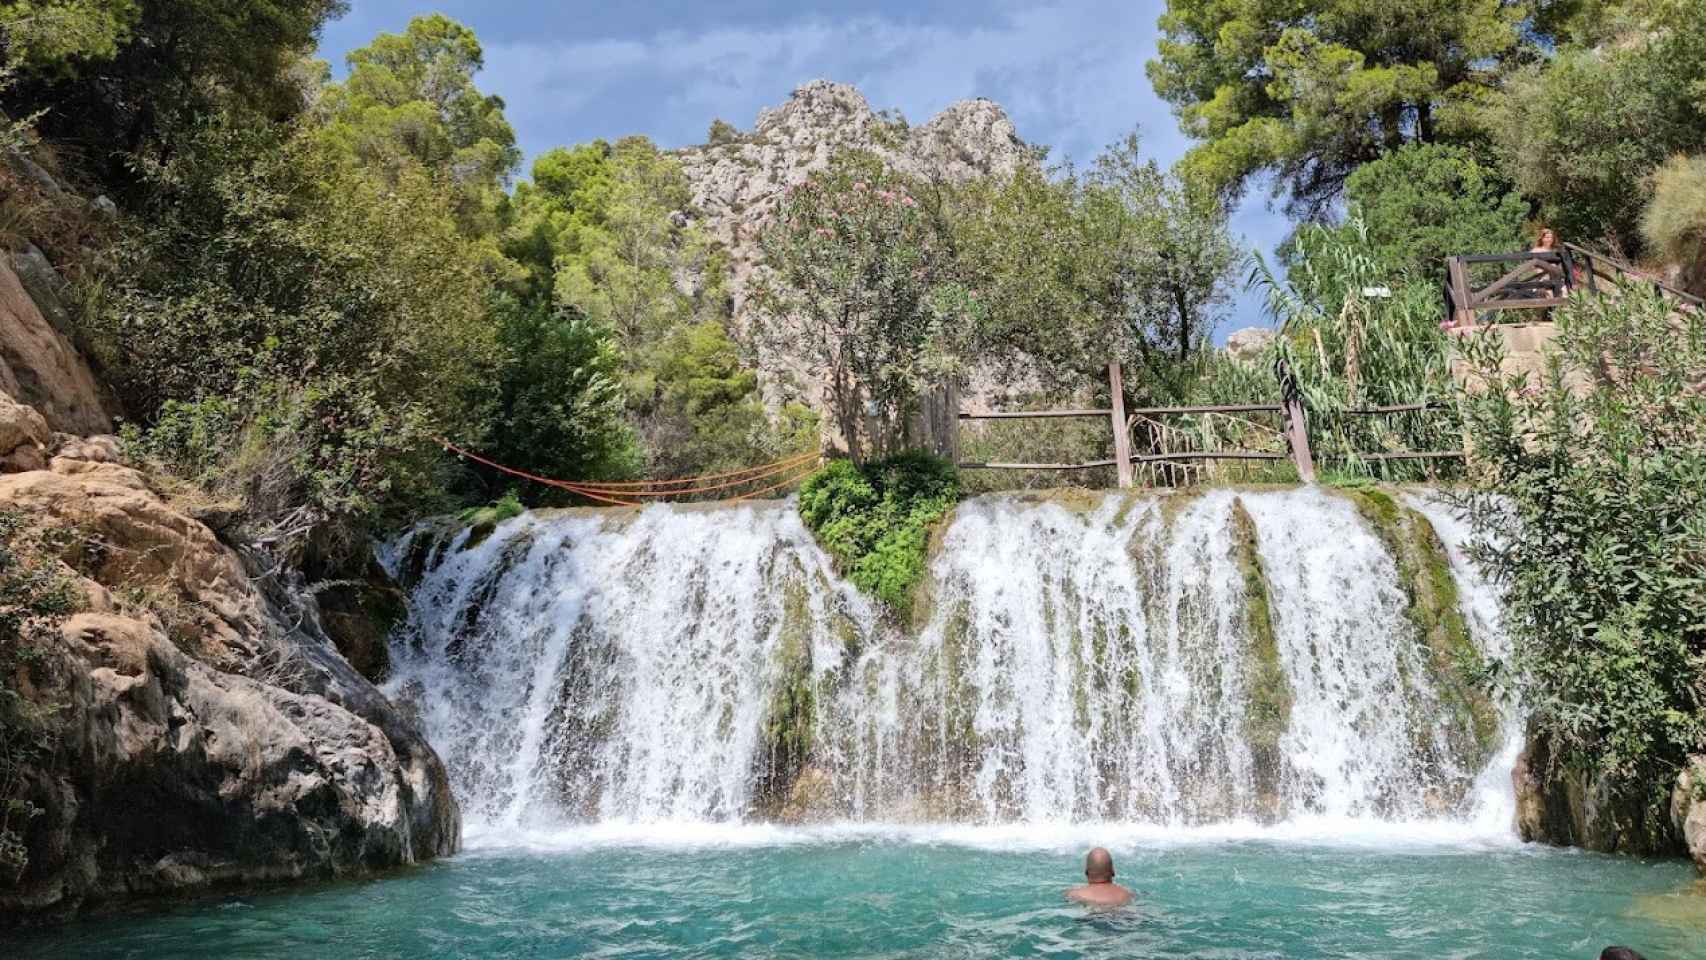 These amazing natural waterfalls are located in Alicante